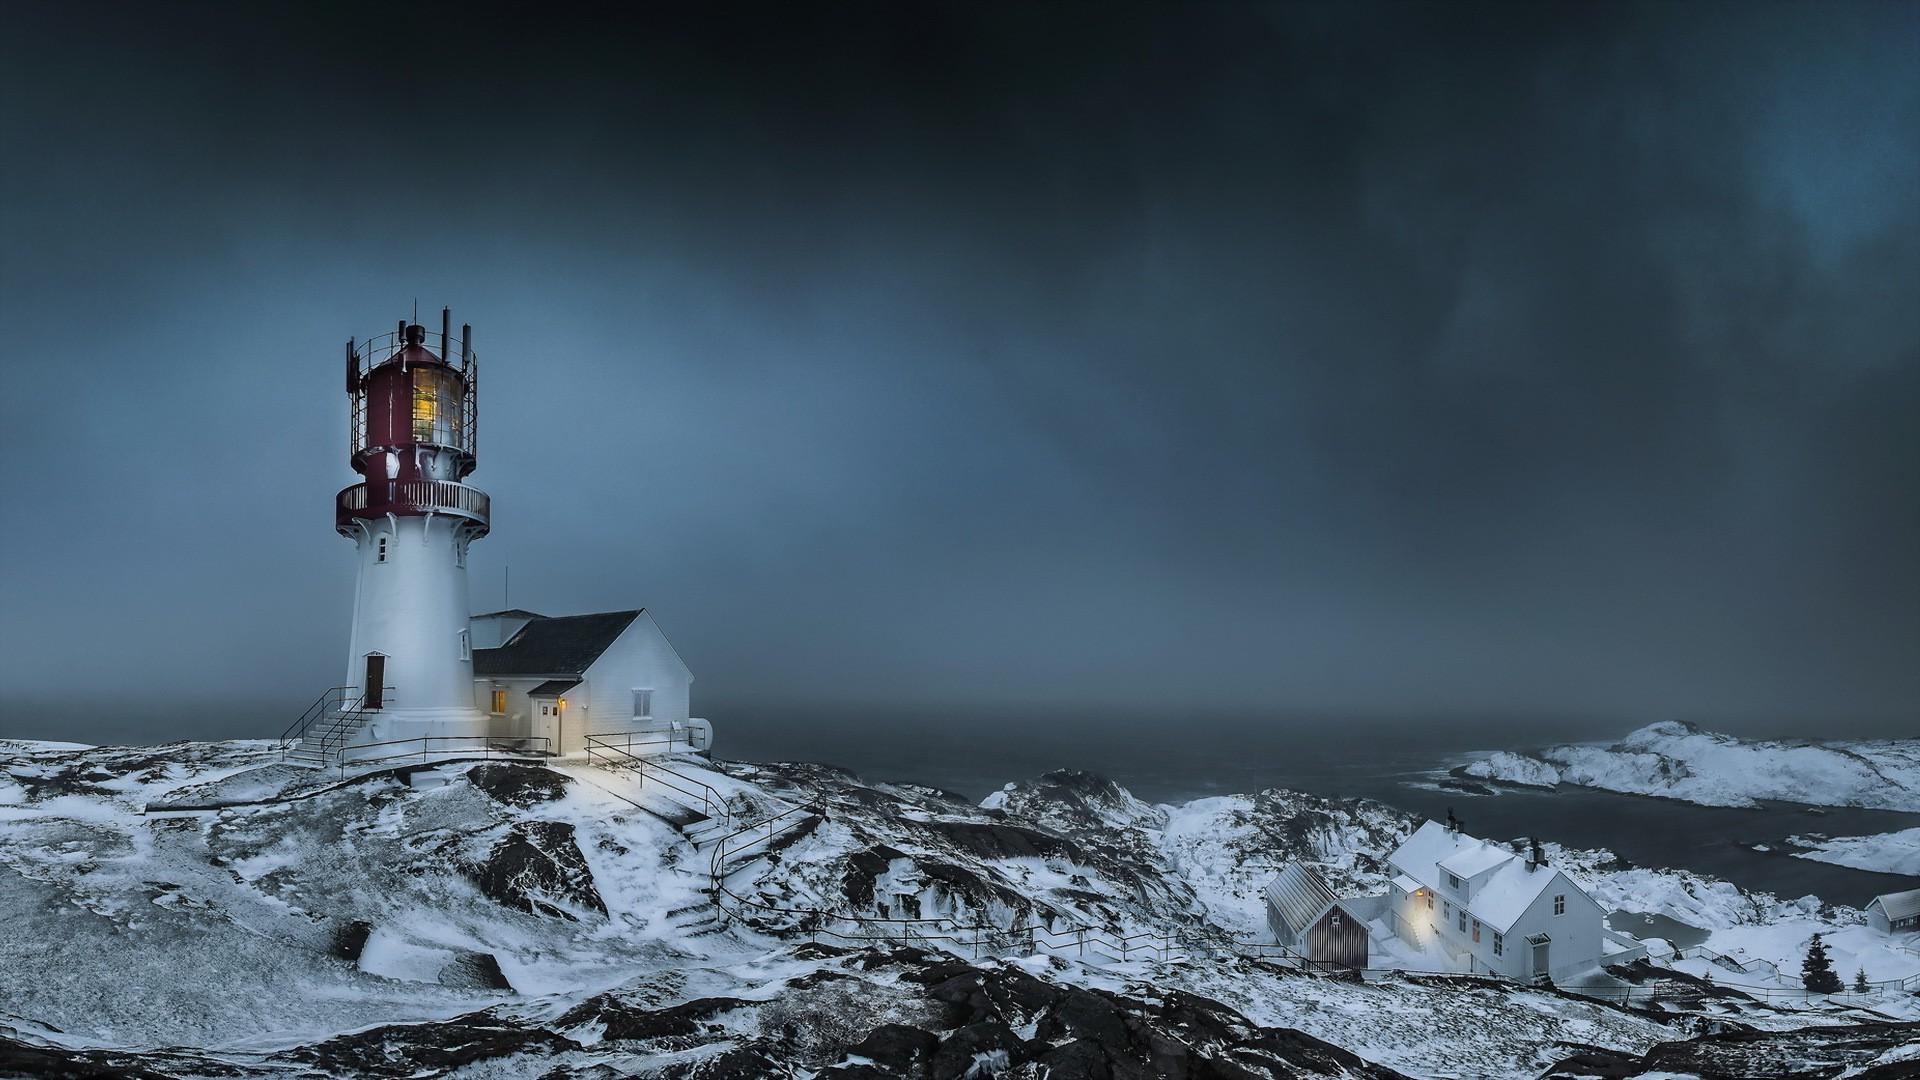 nature, Landscape, Clouds, Trees, Norway, Lighthouse, Winter, Snow, Fence, Rock, Sea, Storm, House, Lights Wallpaper HD / Desktop and Mobile Background